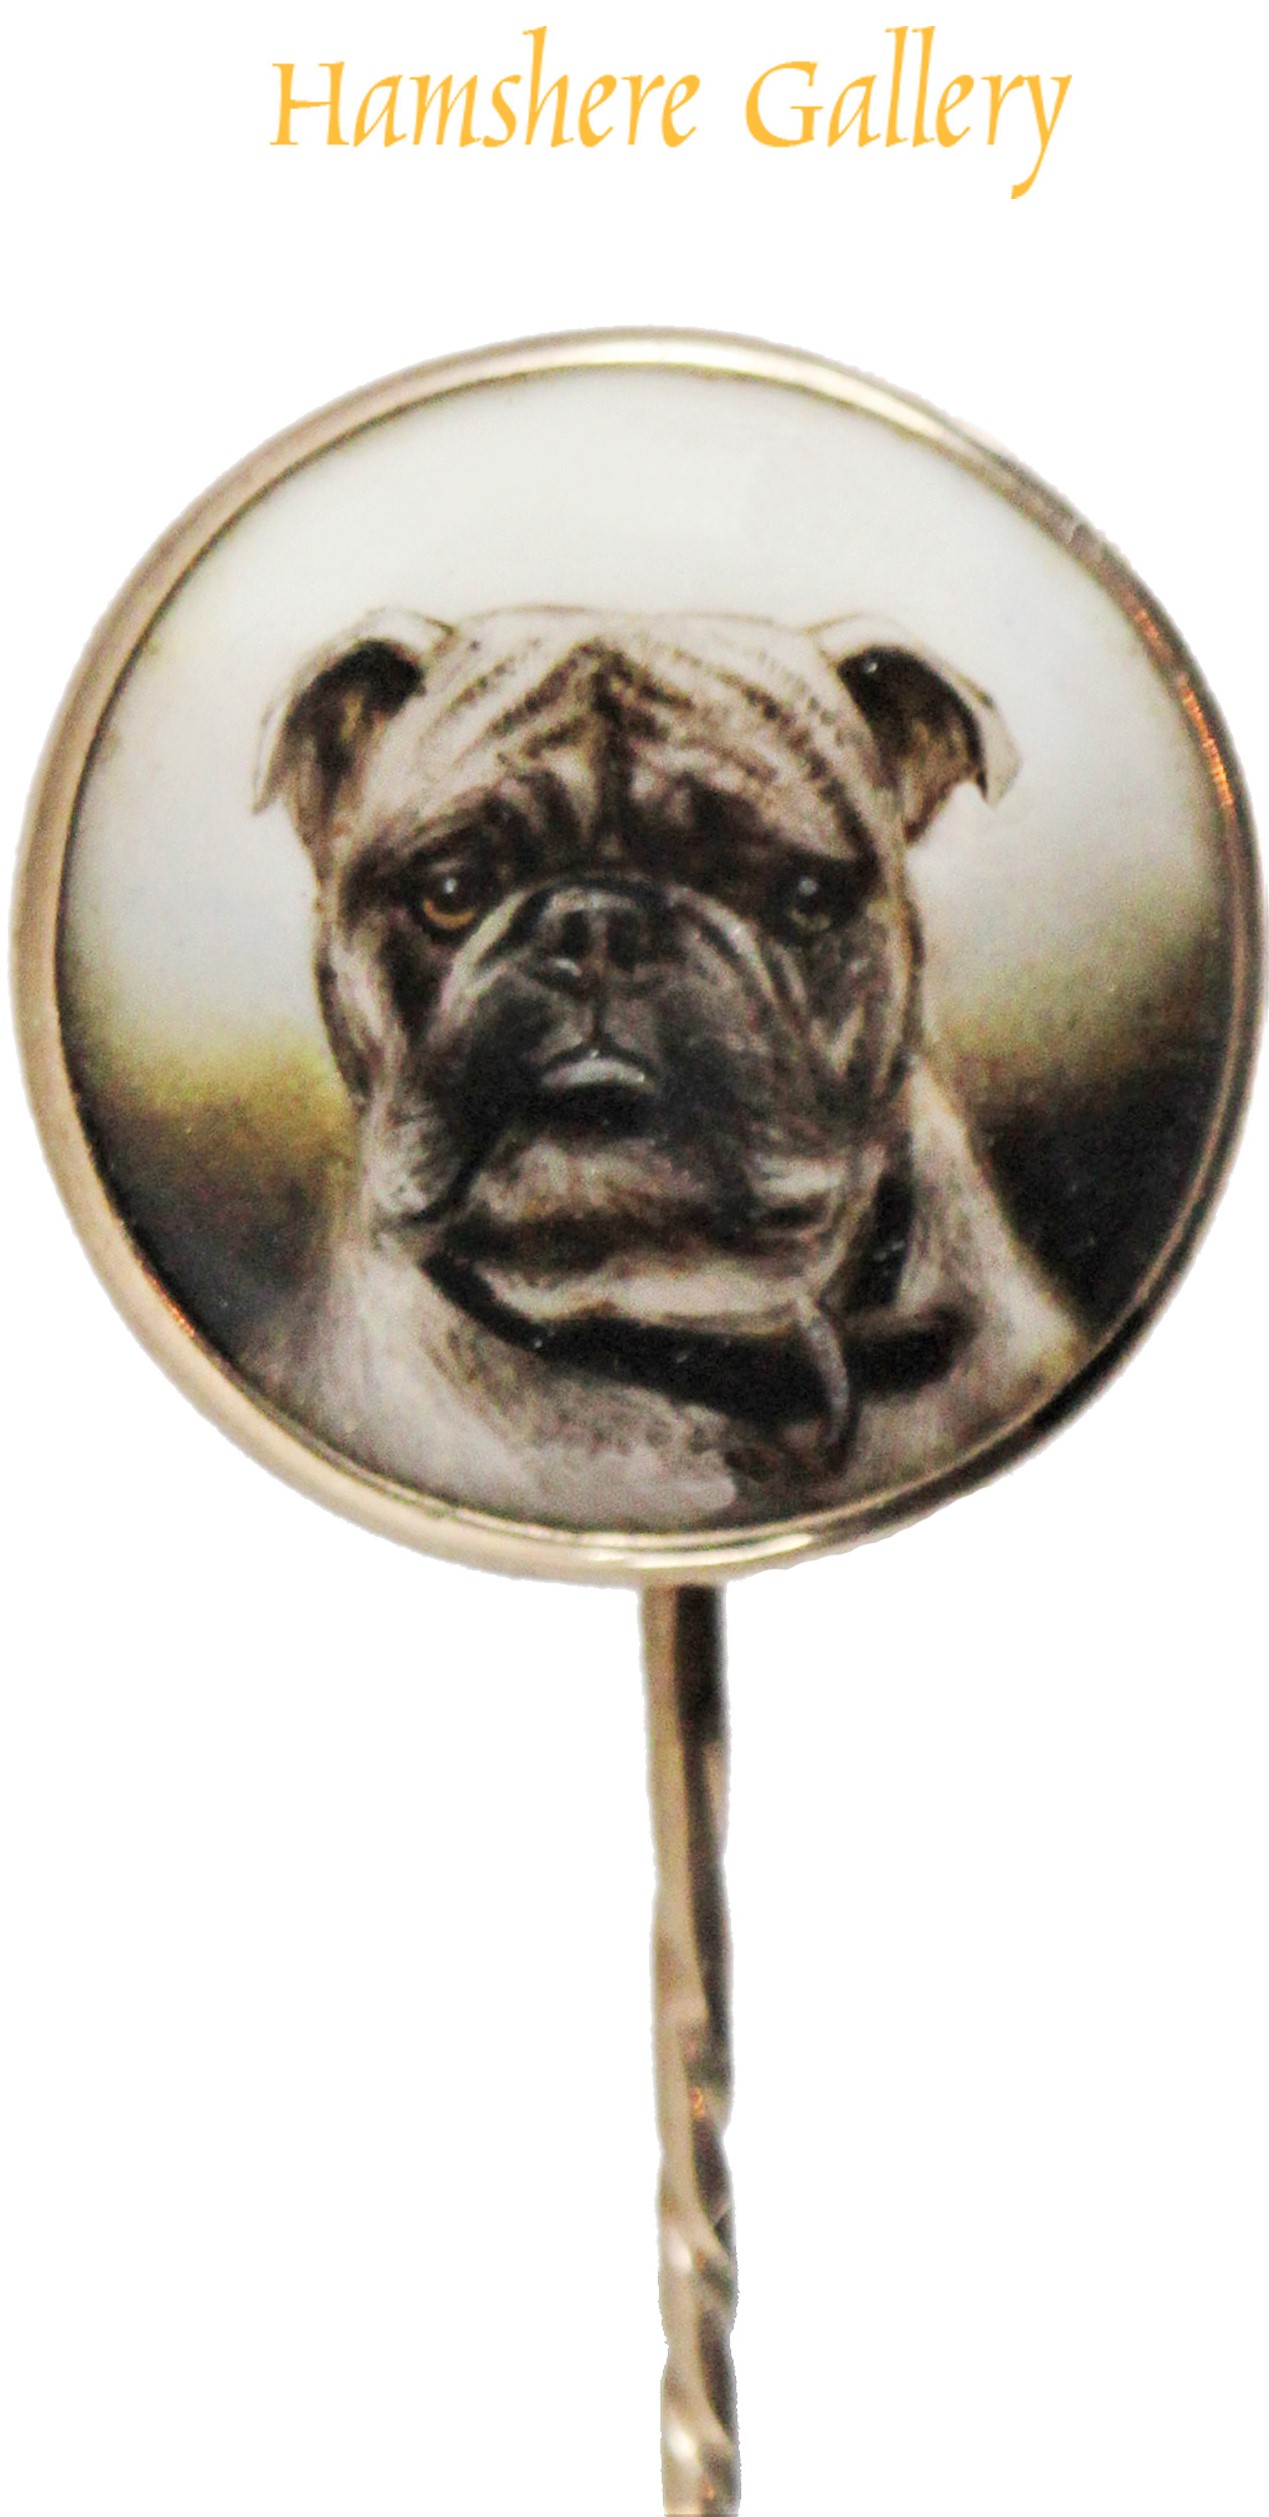 Click to see full size: Gold mounted enamel stick pin of the Bulldog Champion Pathfinder by James (John) William Bailey (1831-1914)- Gold mounted enamel stick pin of the Bulldog Champion Pathfinder by James (John) William Bailey (1831-1914)